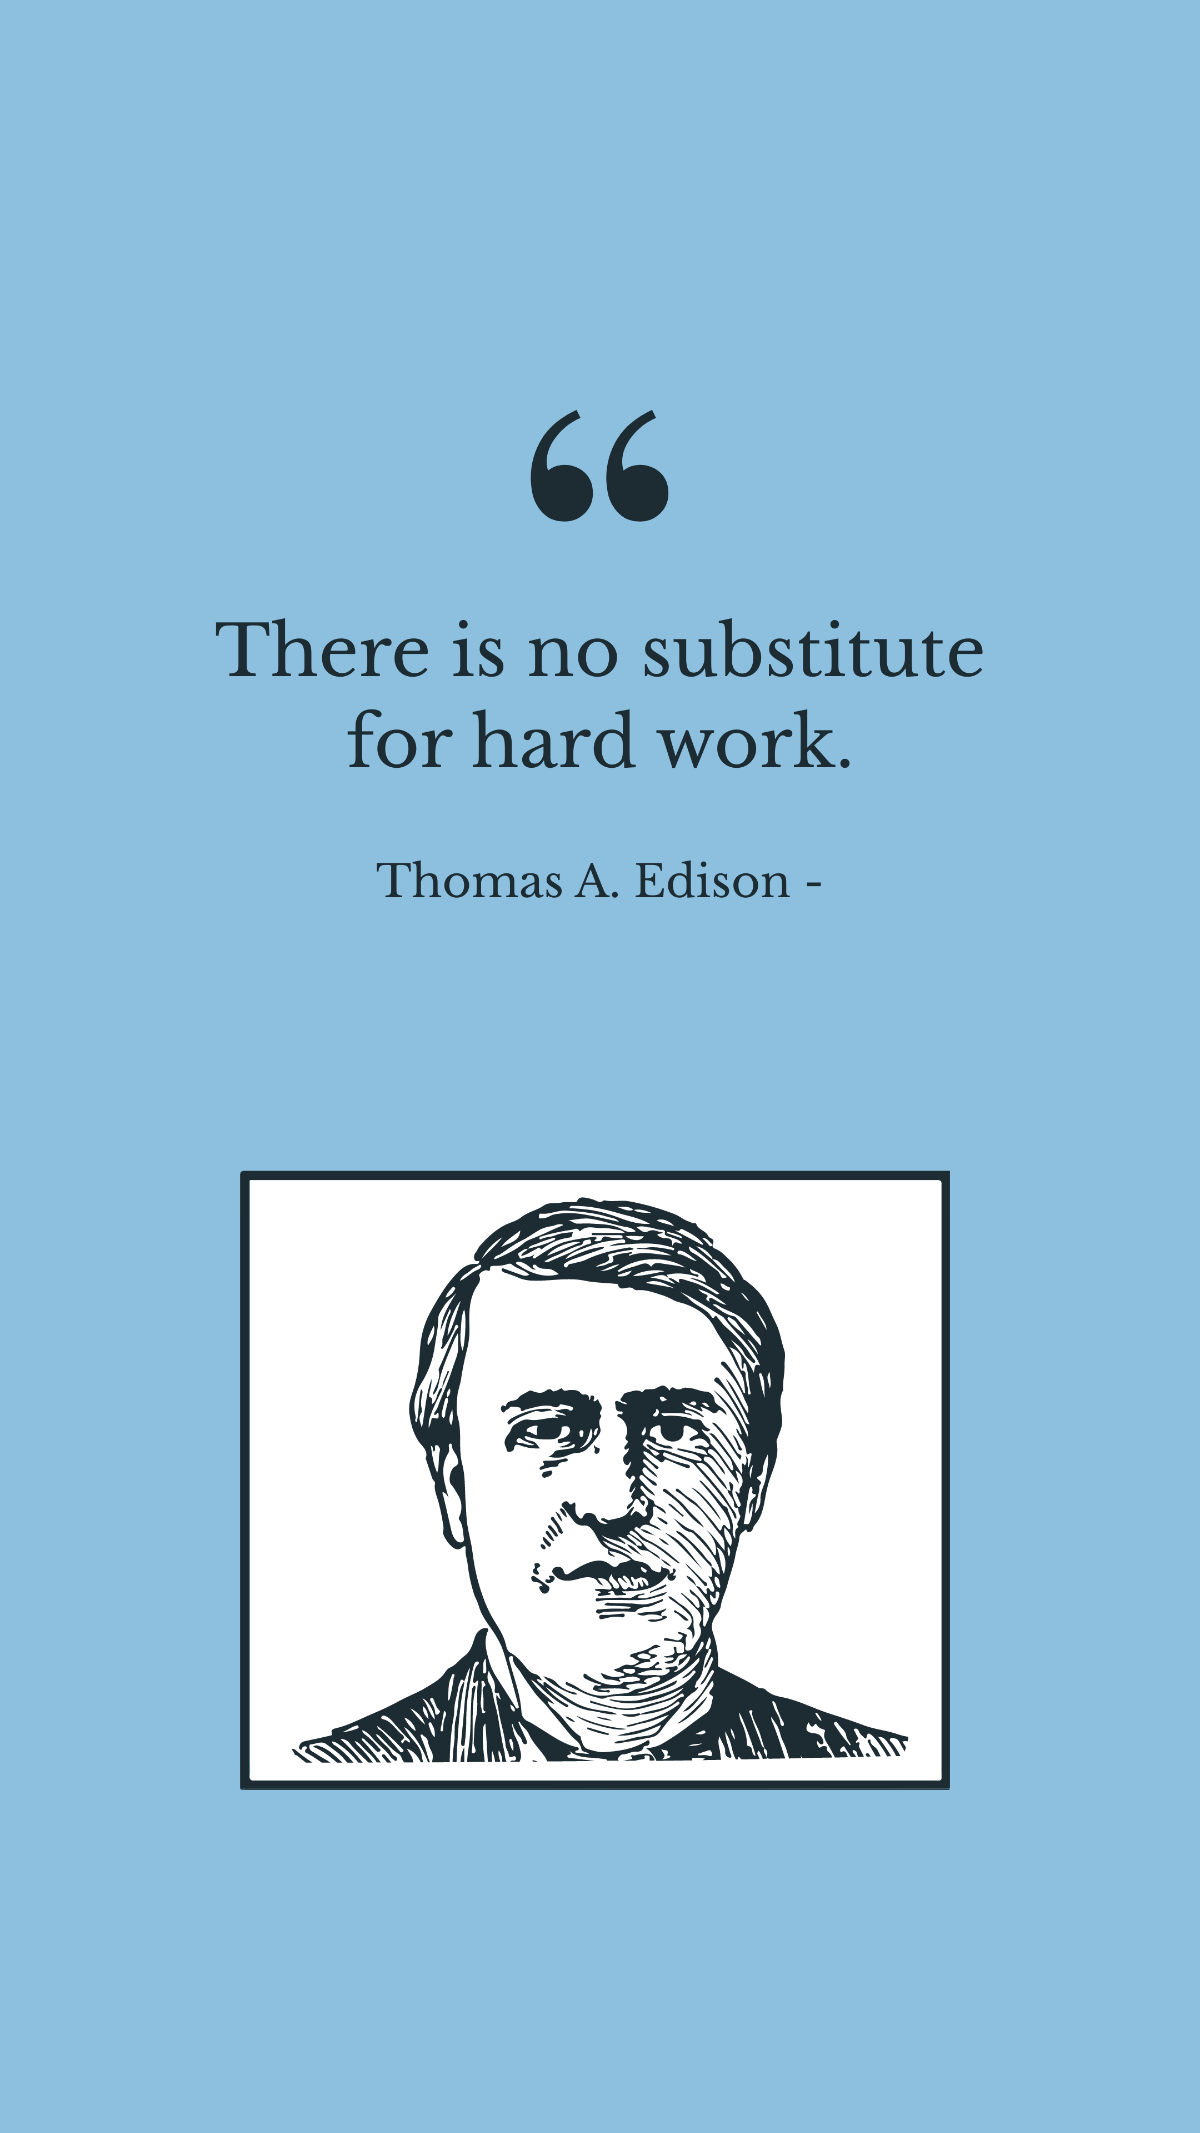 Thomas A. Edison - There is no substitute for hard work. Template